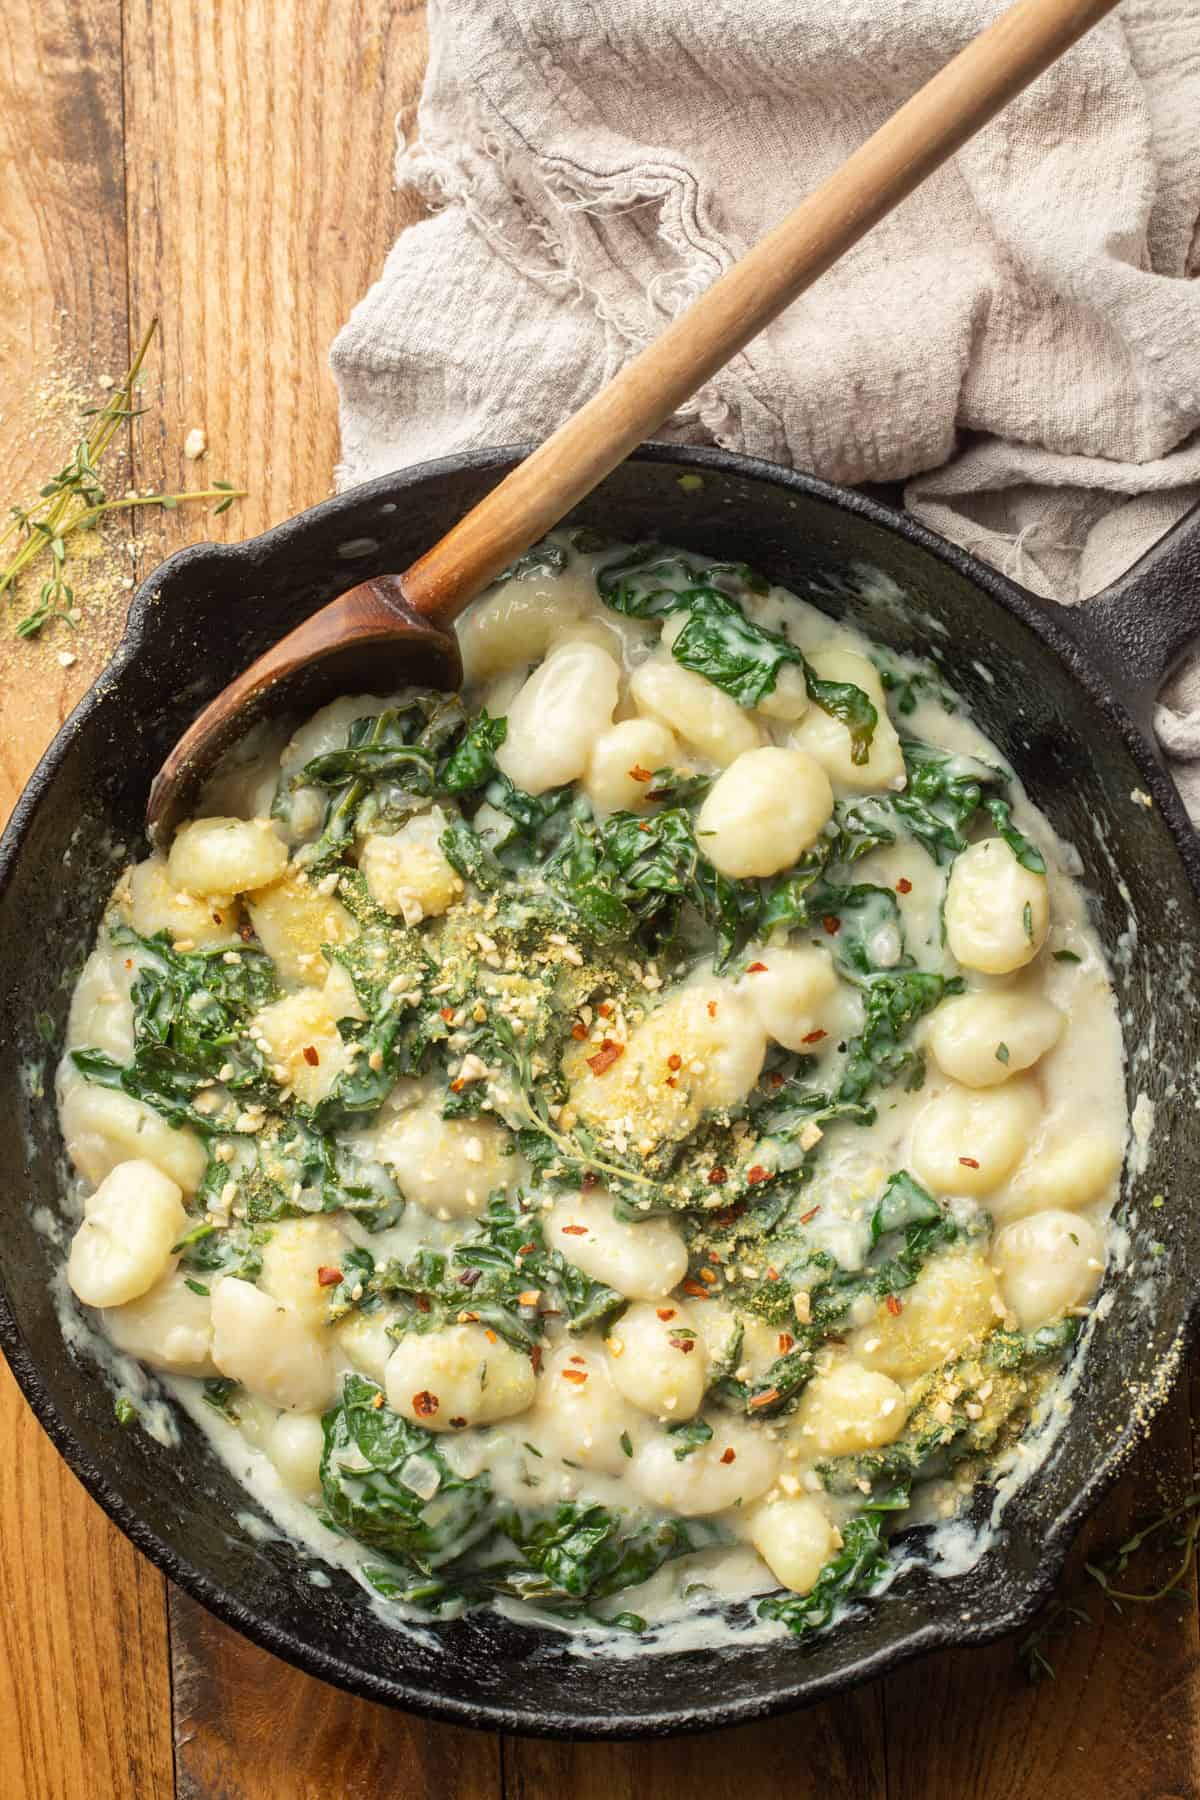 Skillet of vegan gnocchi and kale with wooden spoon.